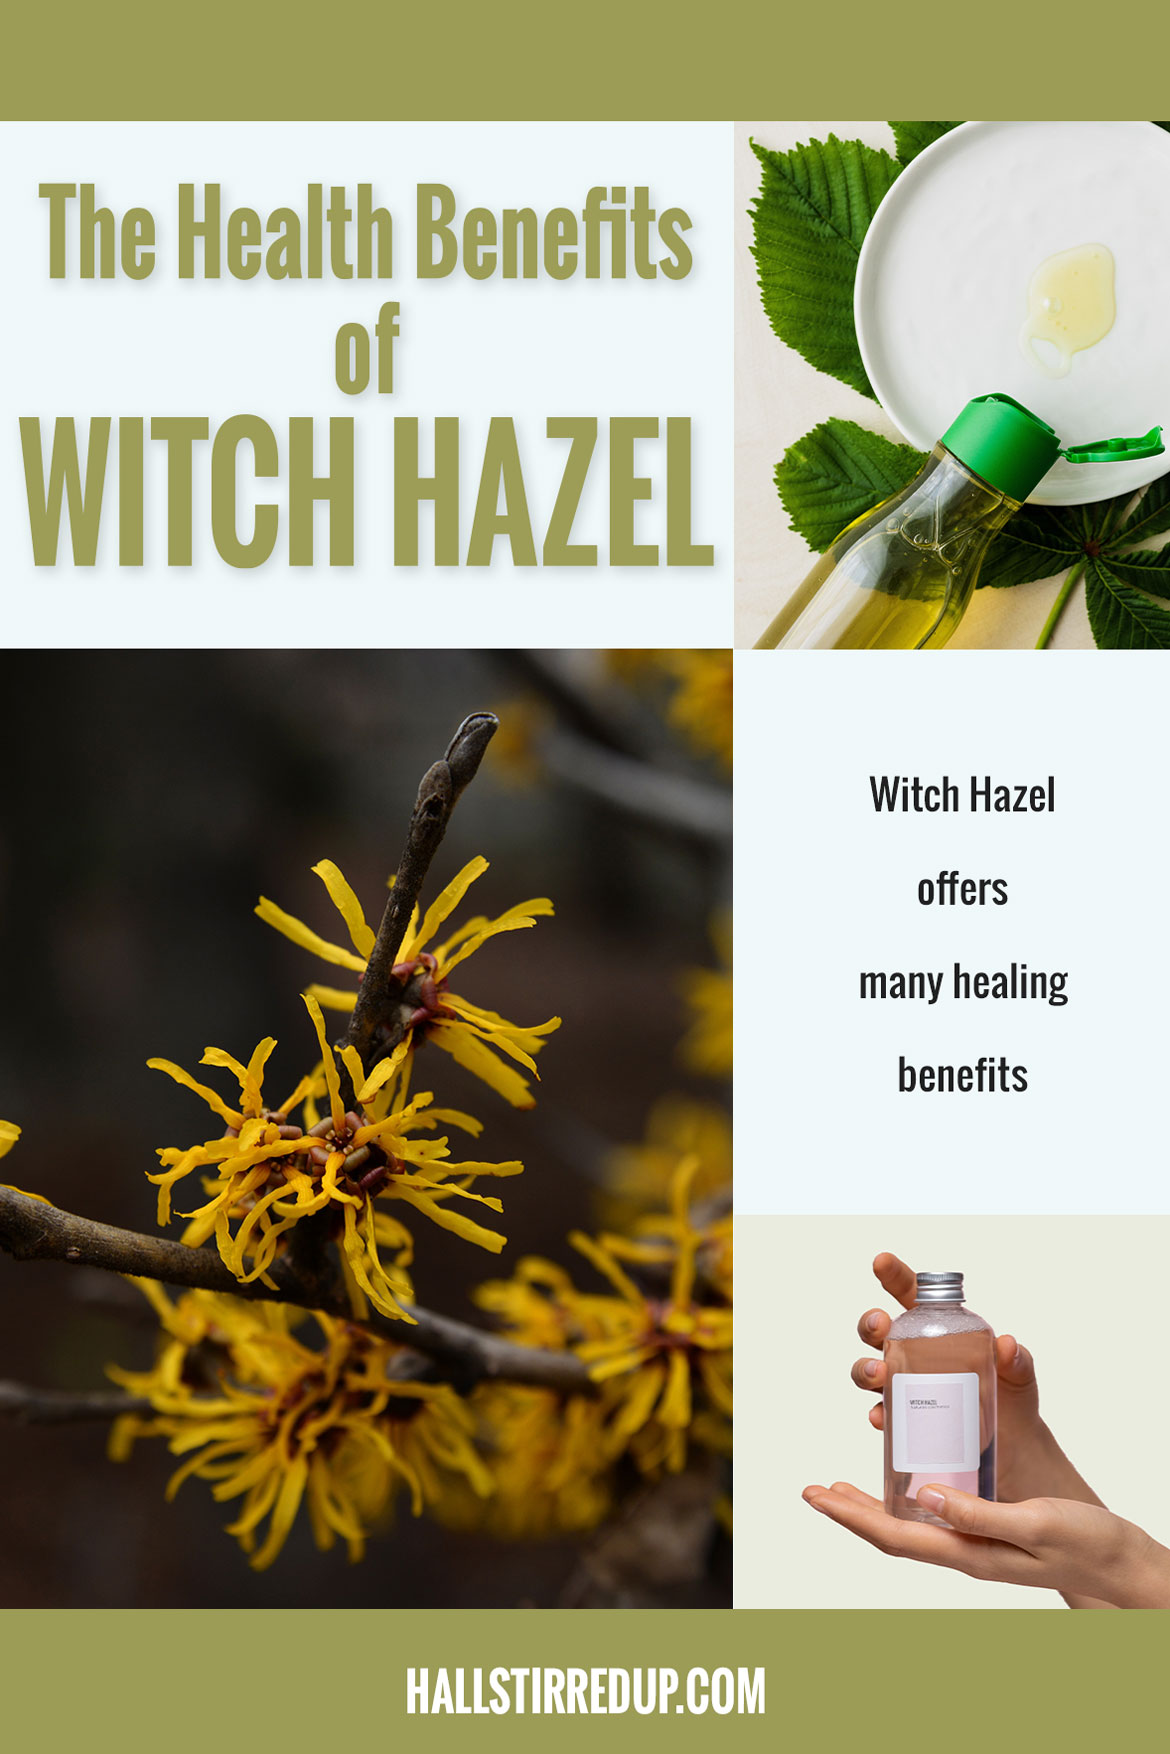 The Health Benefits of Witch Hazel